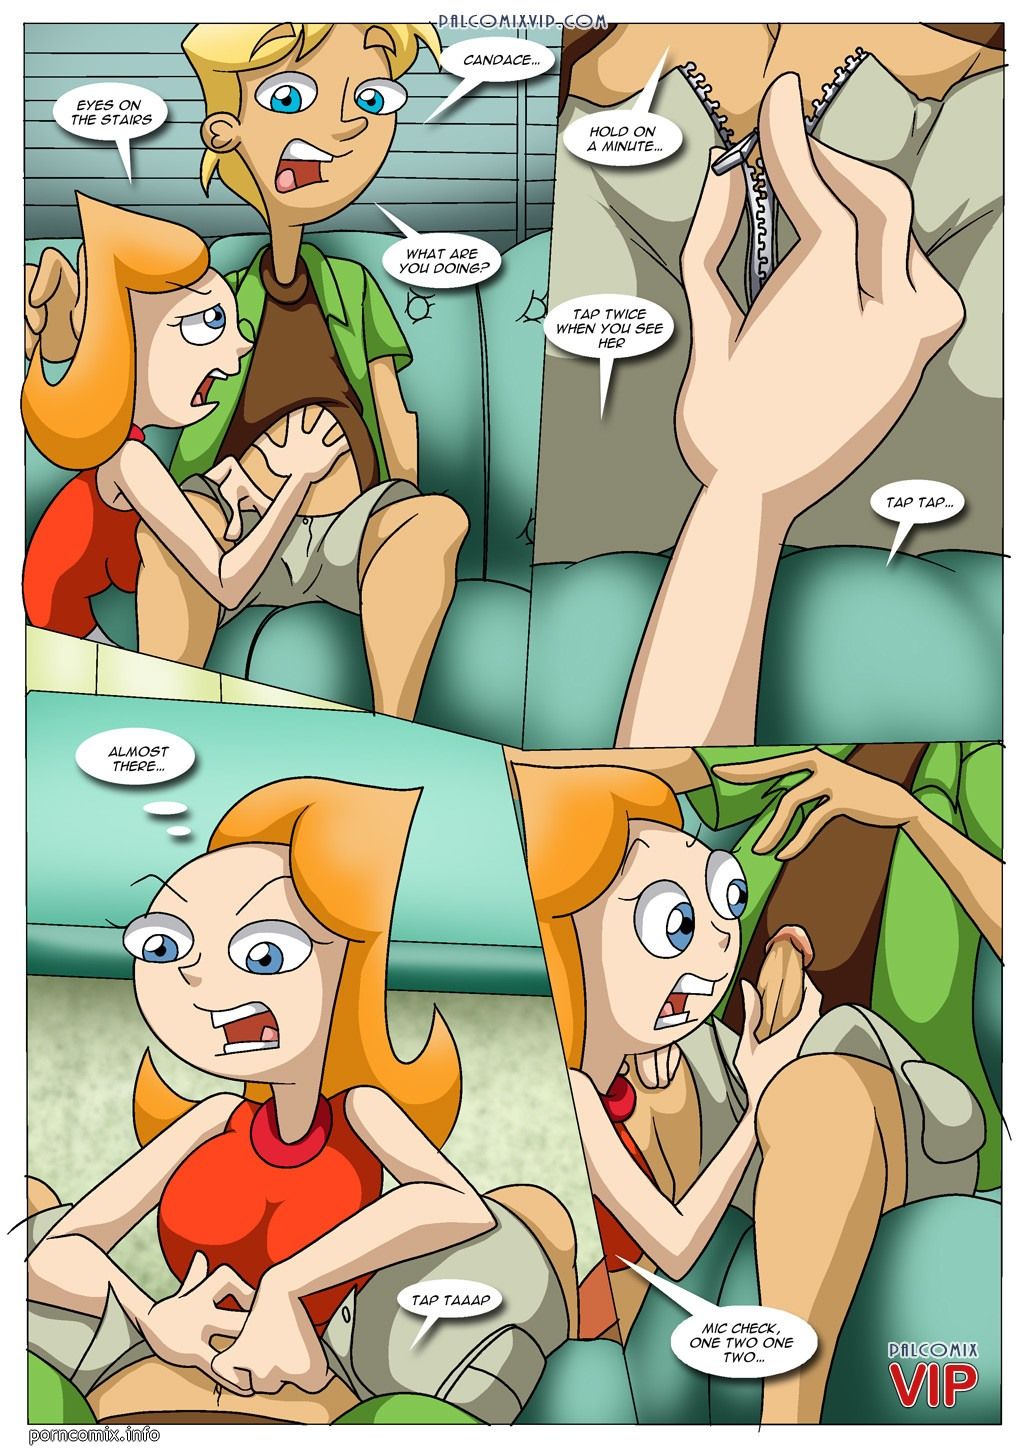 Pal Comix - Phineas And Ferb - Helping Out a Friend page 9